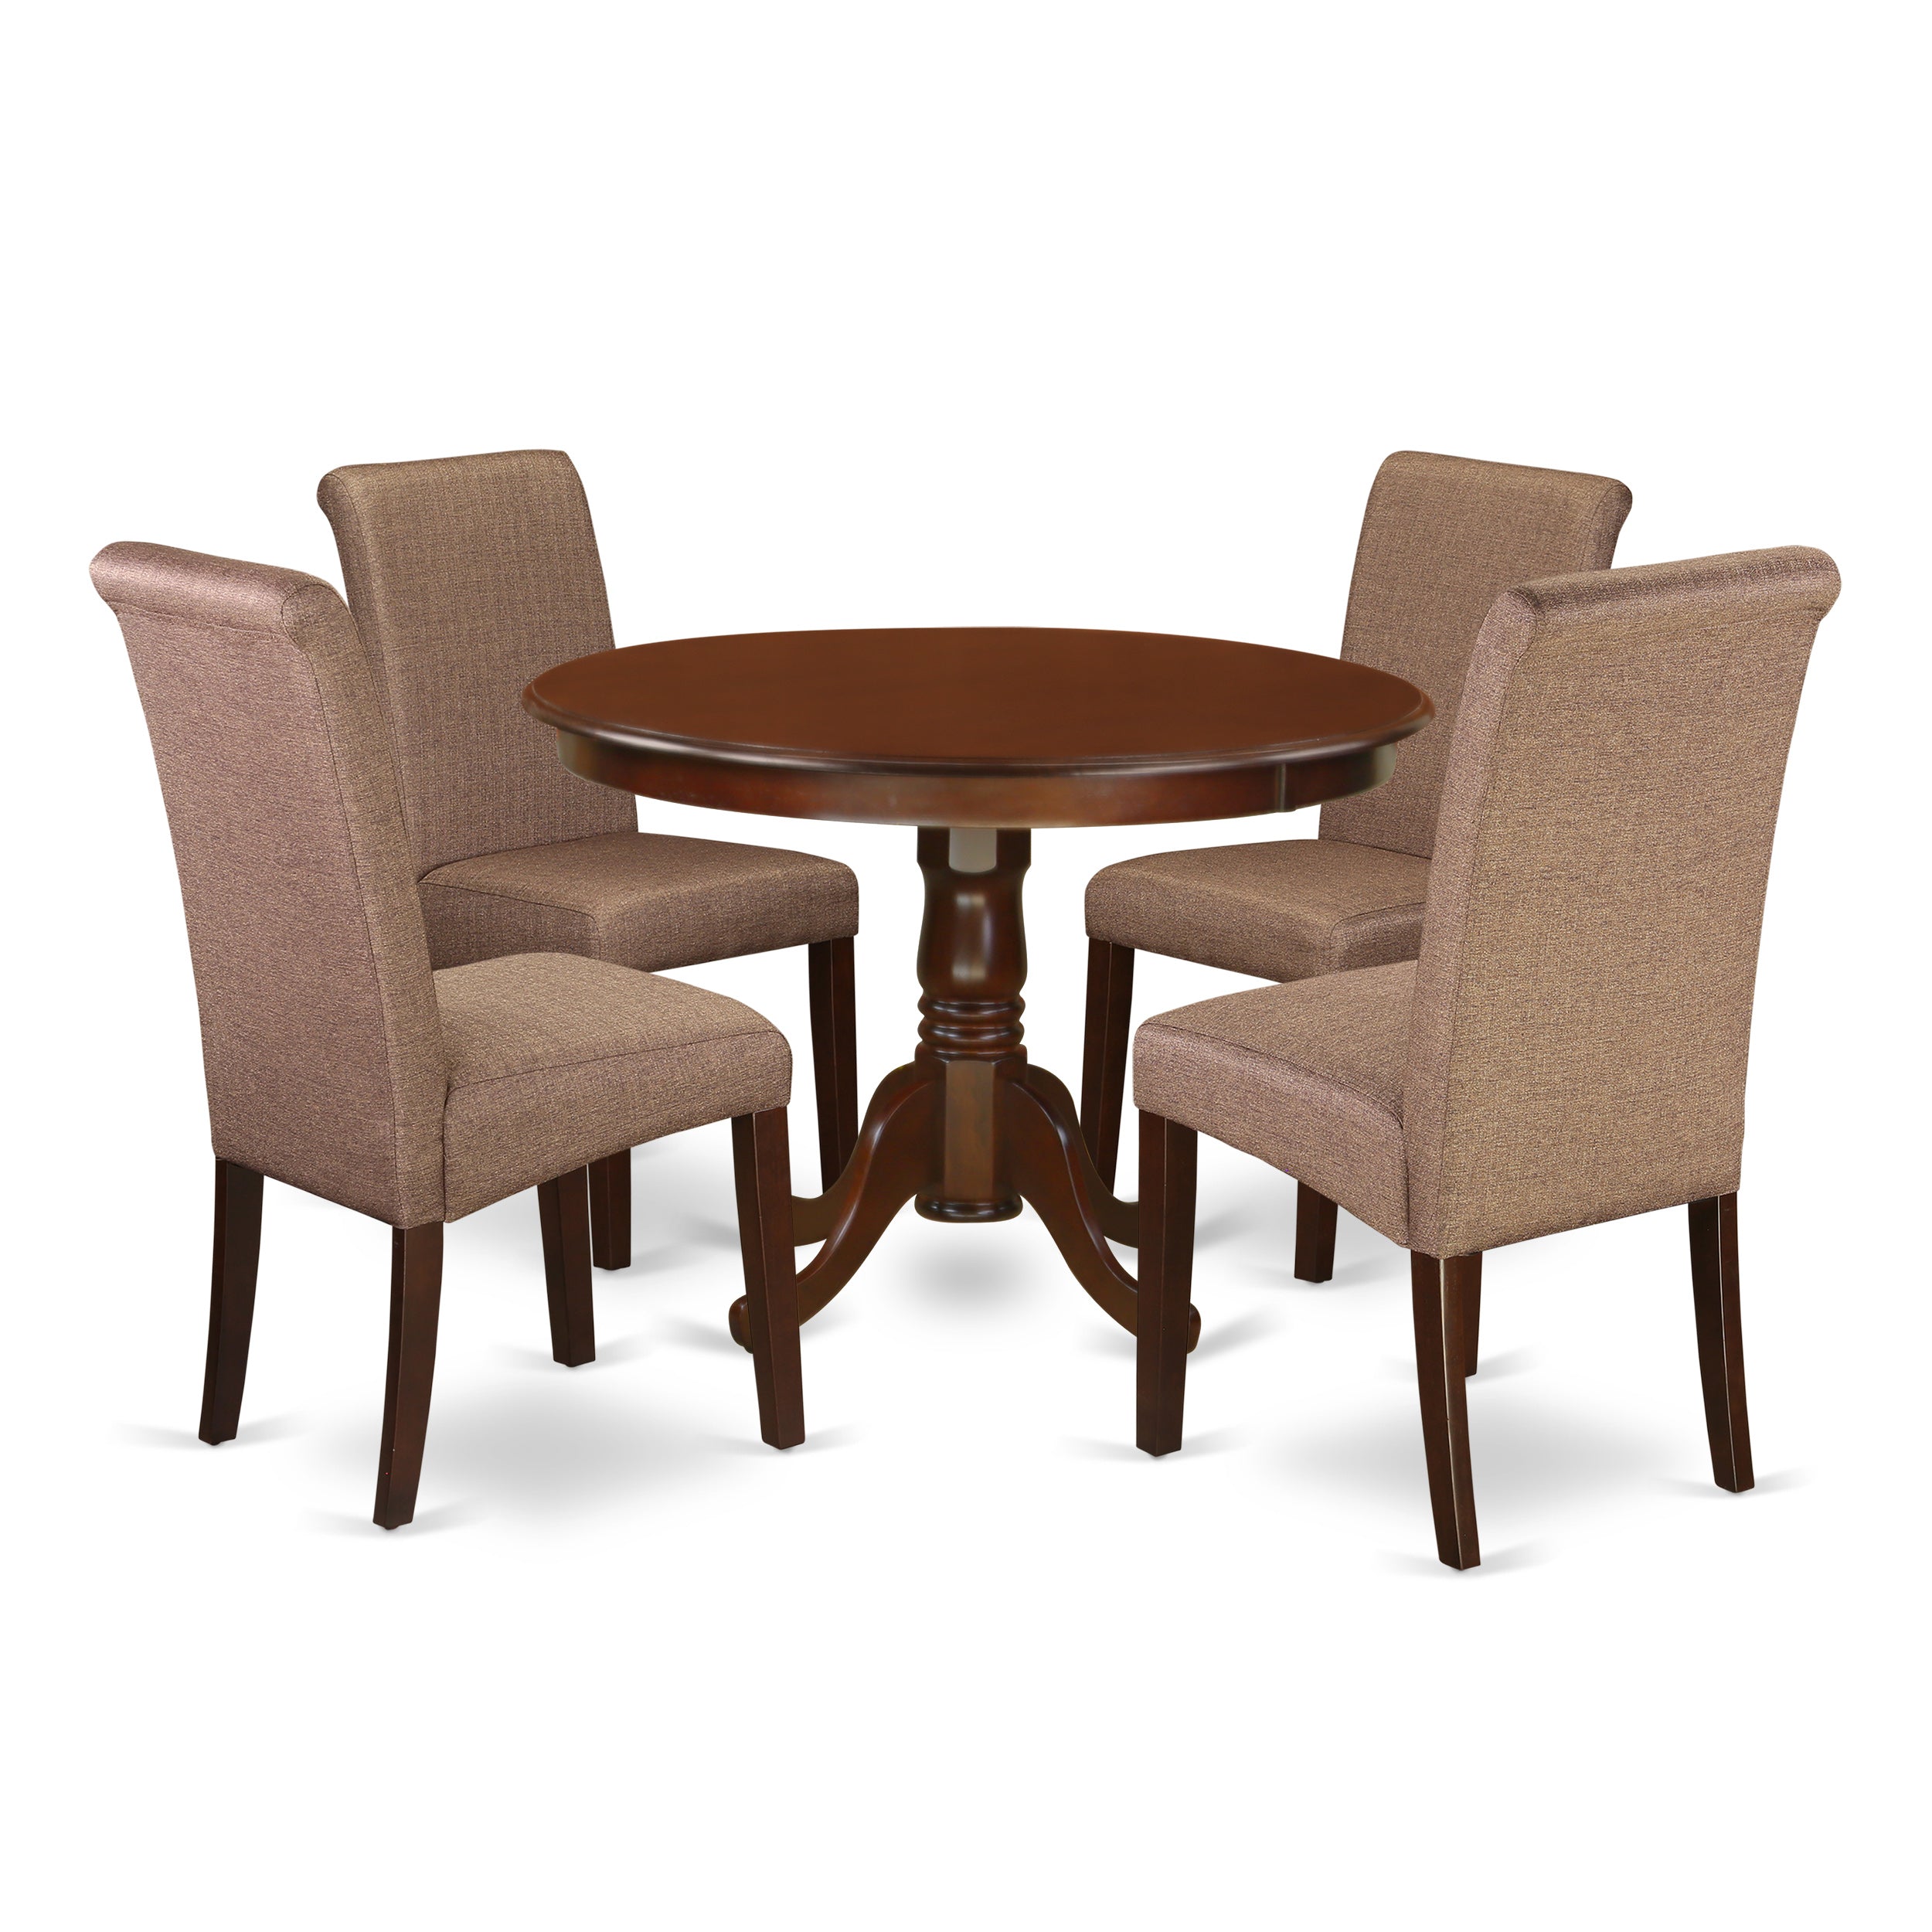 HLBA5-MAH-18 5Pc Small Round table with linen brown fabric Parson chairs with mahogany chair legs